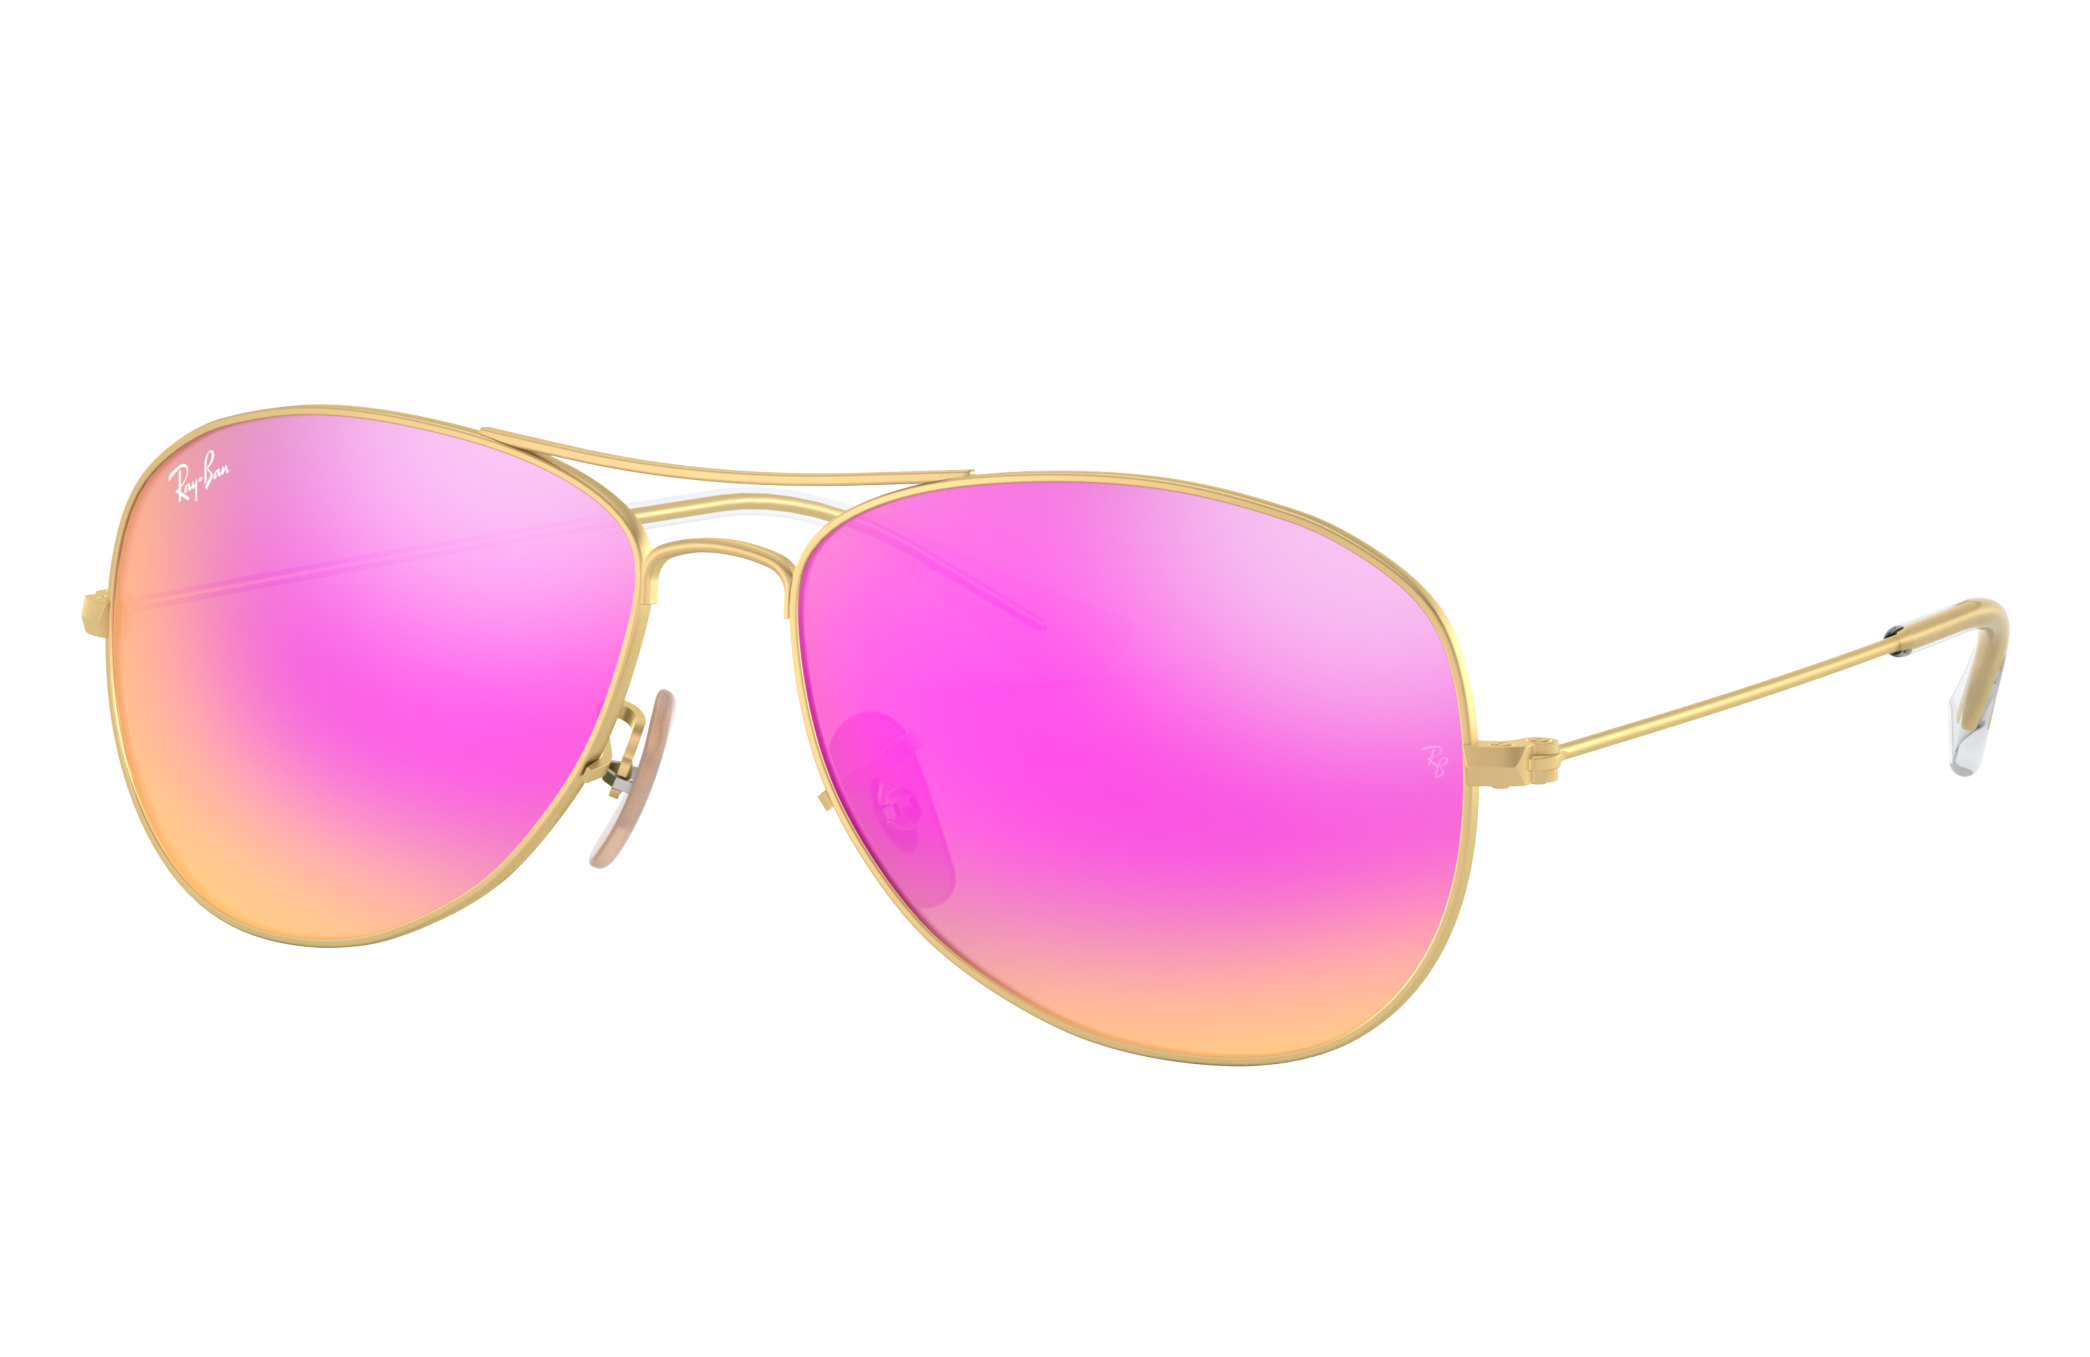 Cockpit Sunglasses in Gold and Cyclamen | Ray-Ban®